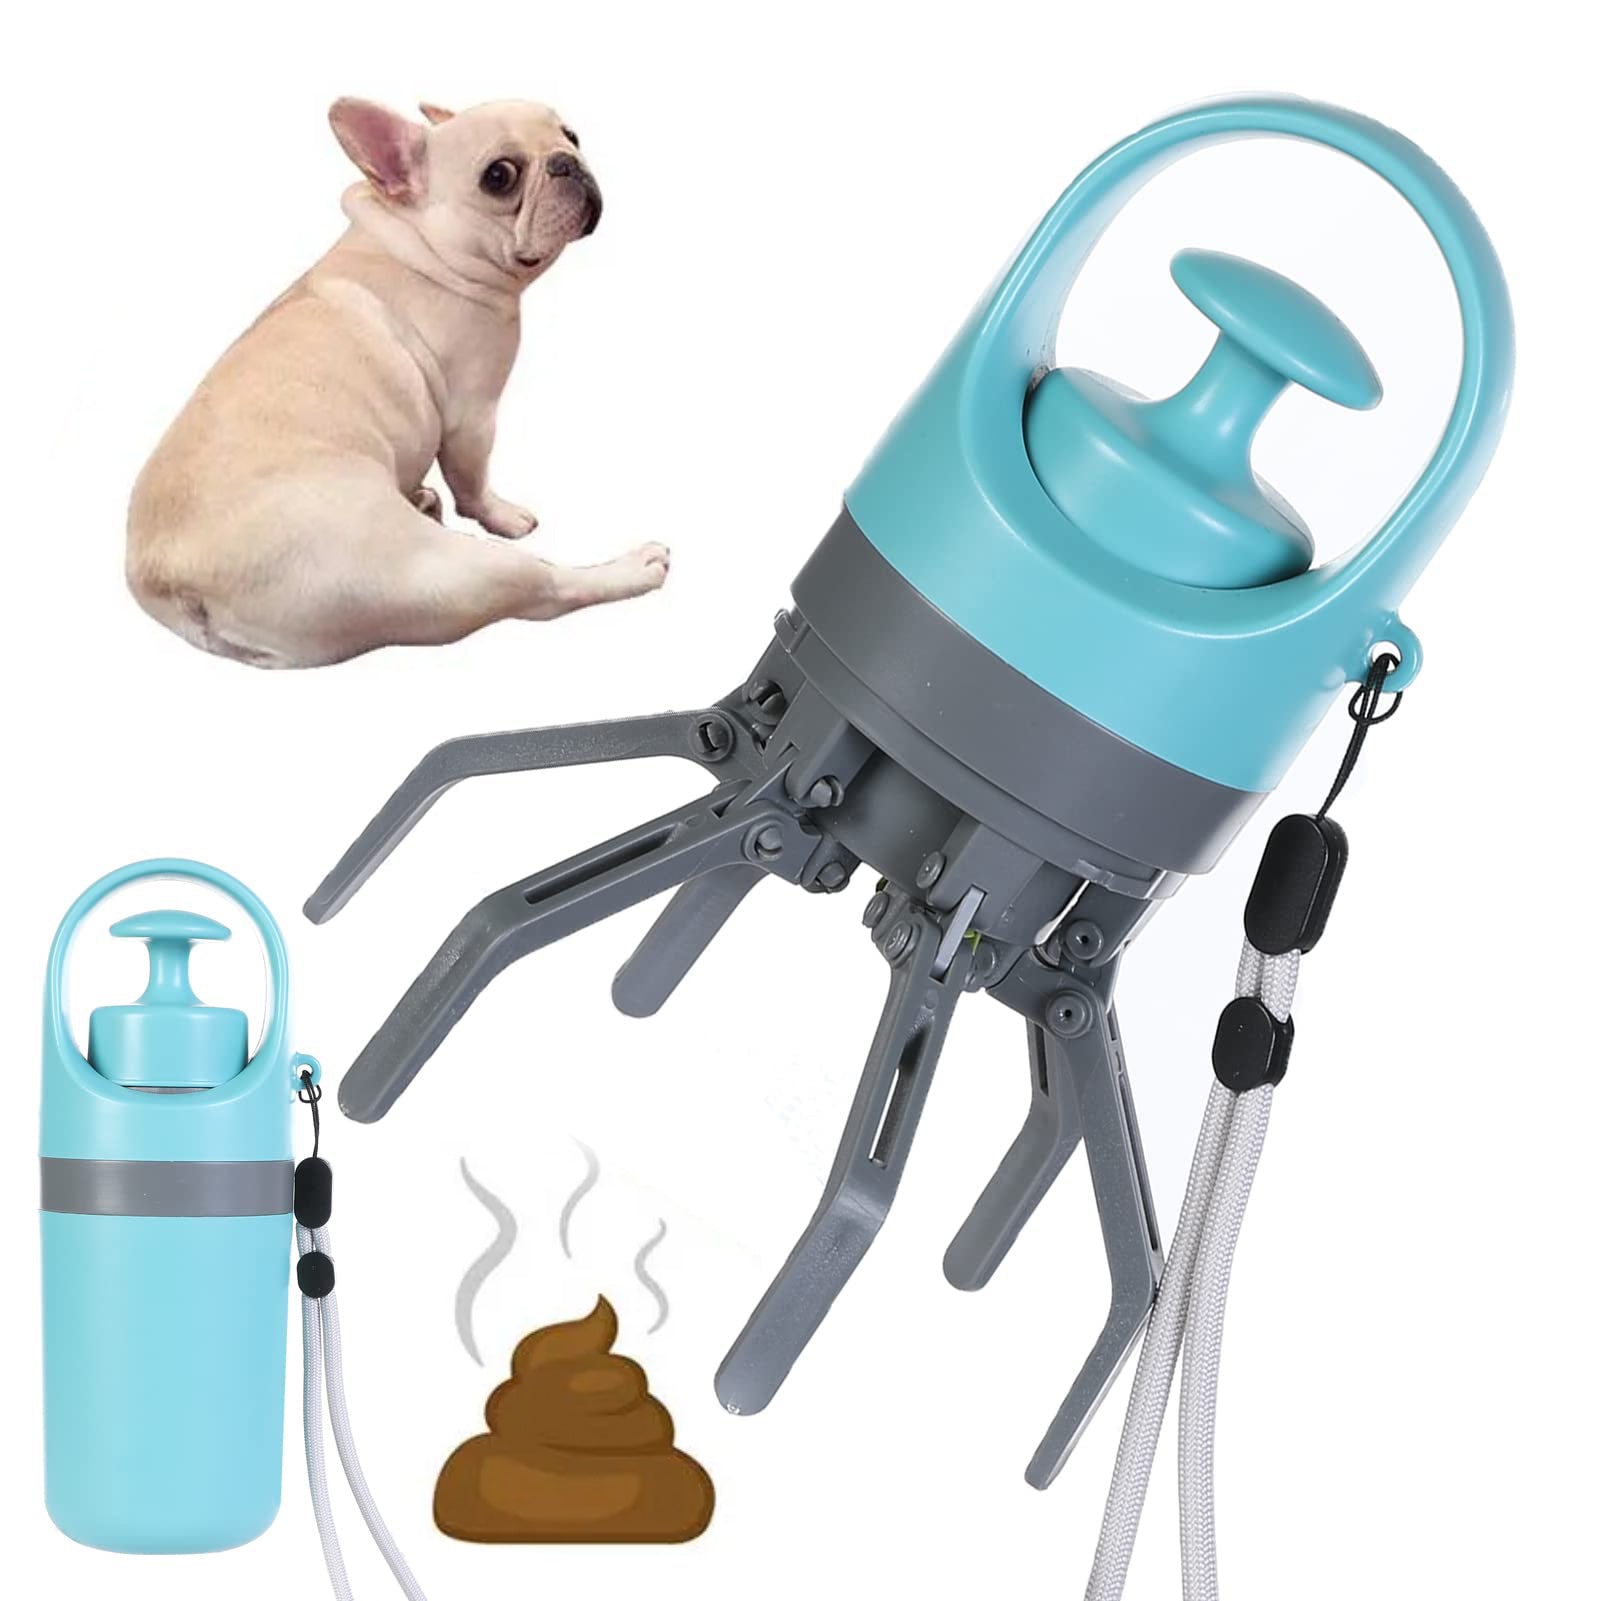 Portable Lightweight Dog Pooper Scooper With Built-in Poop Bag Dispenser Eight-claw Shovel For Pet Toilet Picker Pet Products - ihawk.store